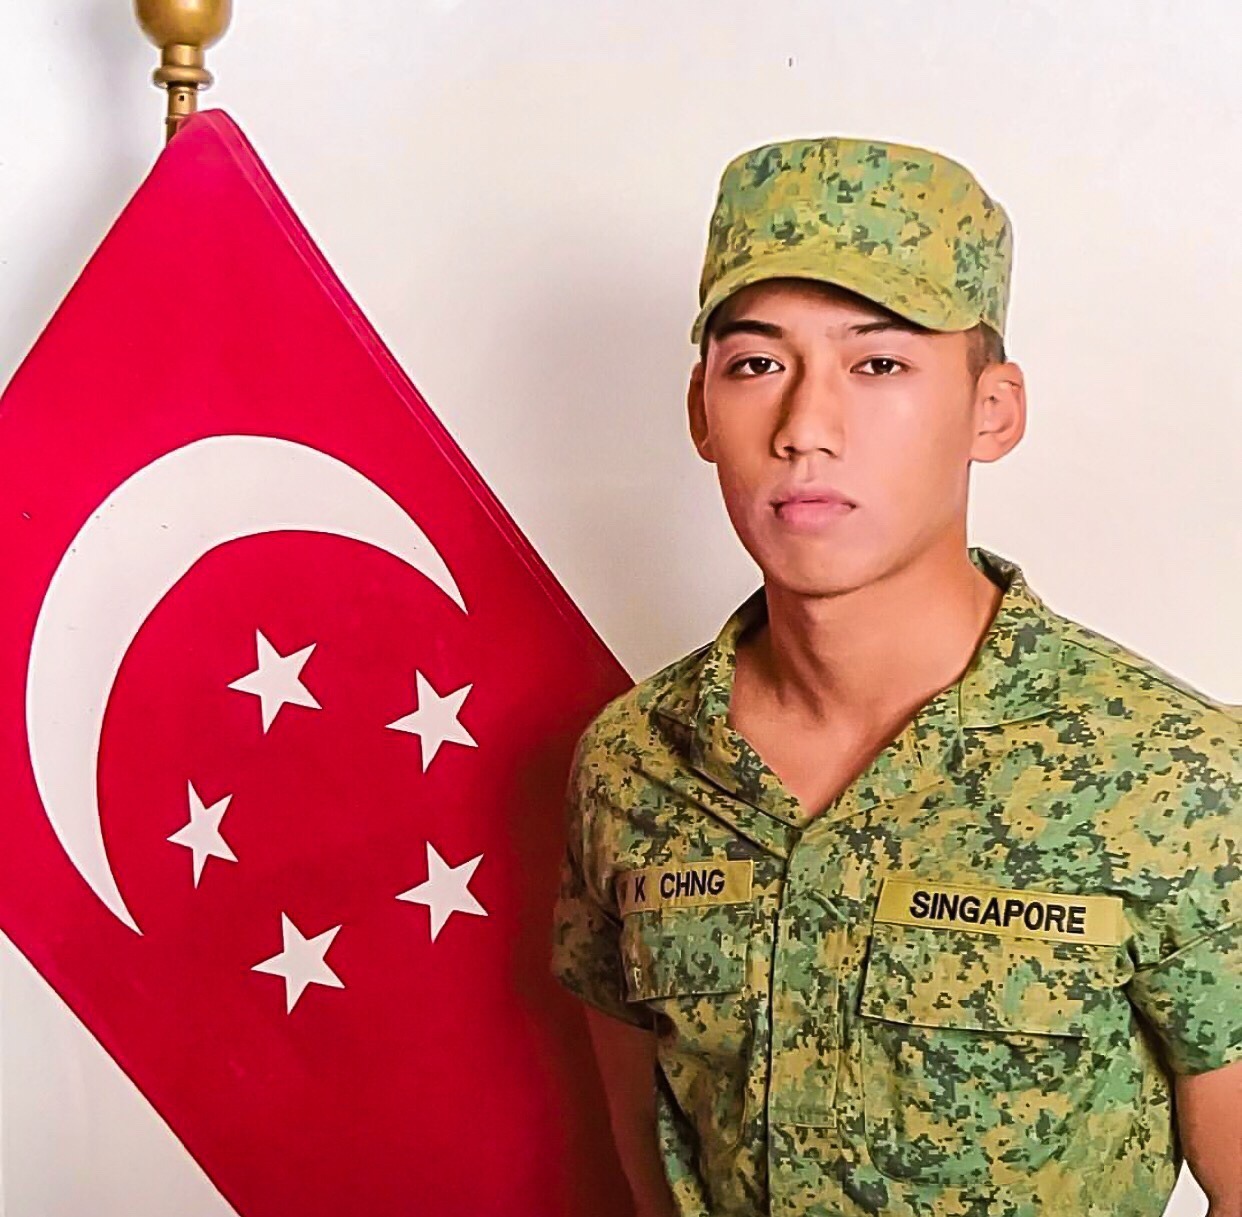 singaporeeboyy:  bugscasper:   |Men in uniforms - Soldiers| (2/3)  Here’s another